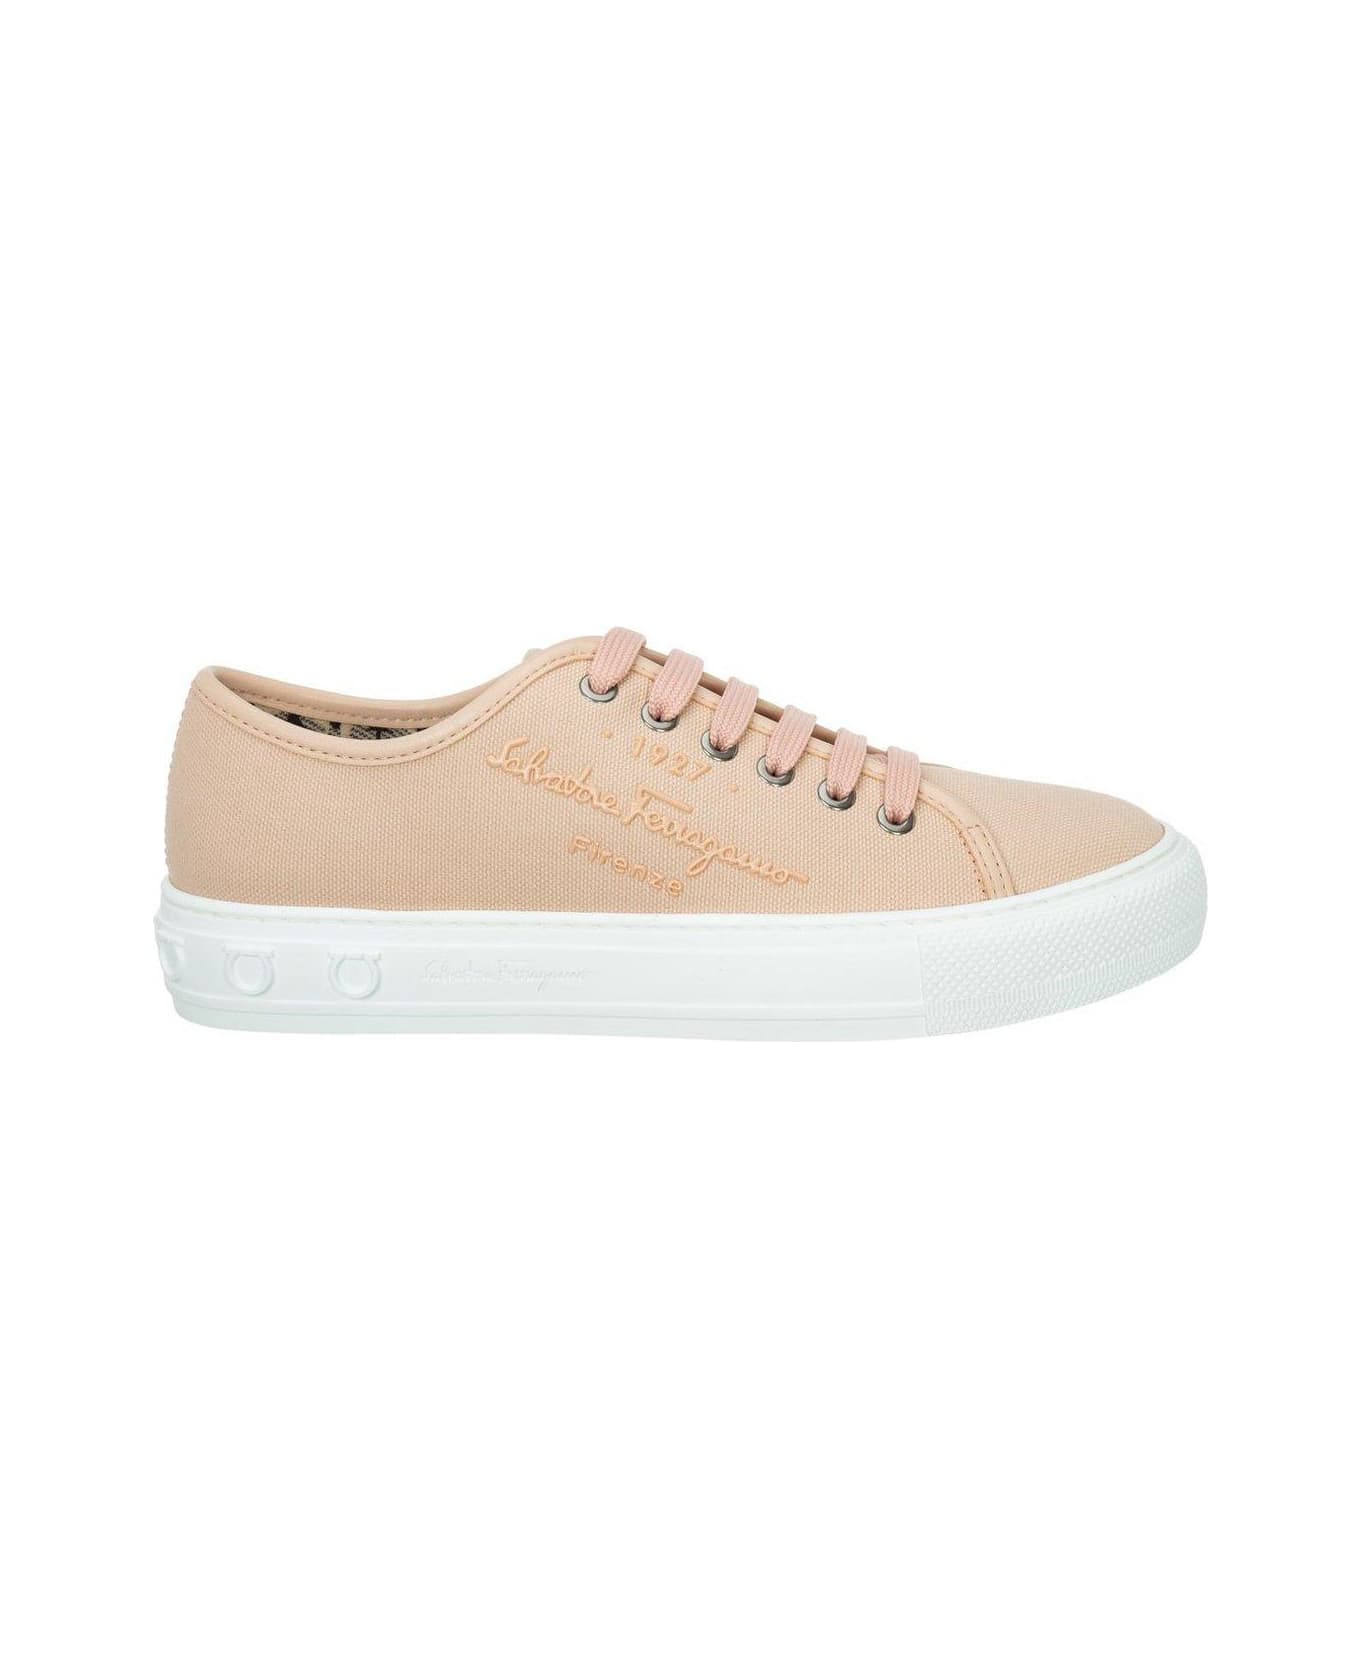 Ferragamo Logo Embossed Lace-up Sneakers - Pink スニーカー